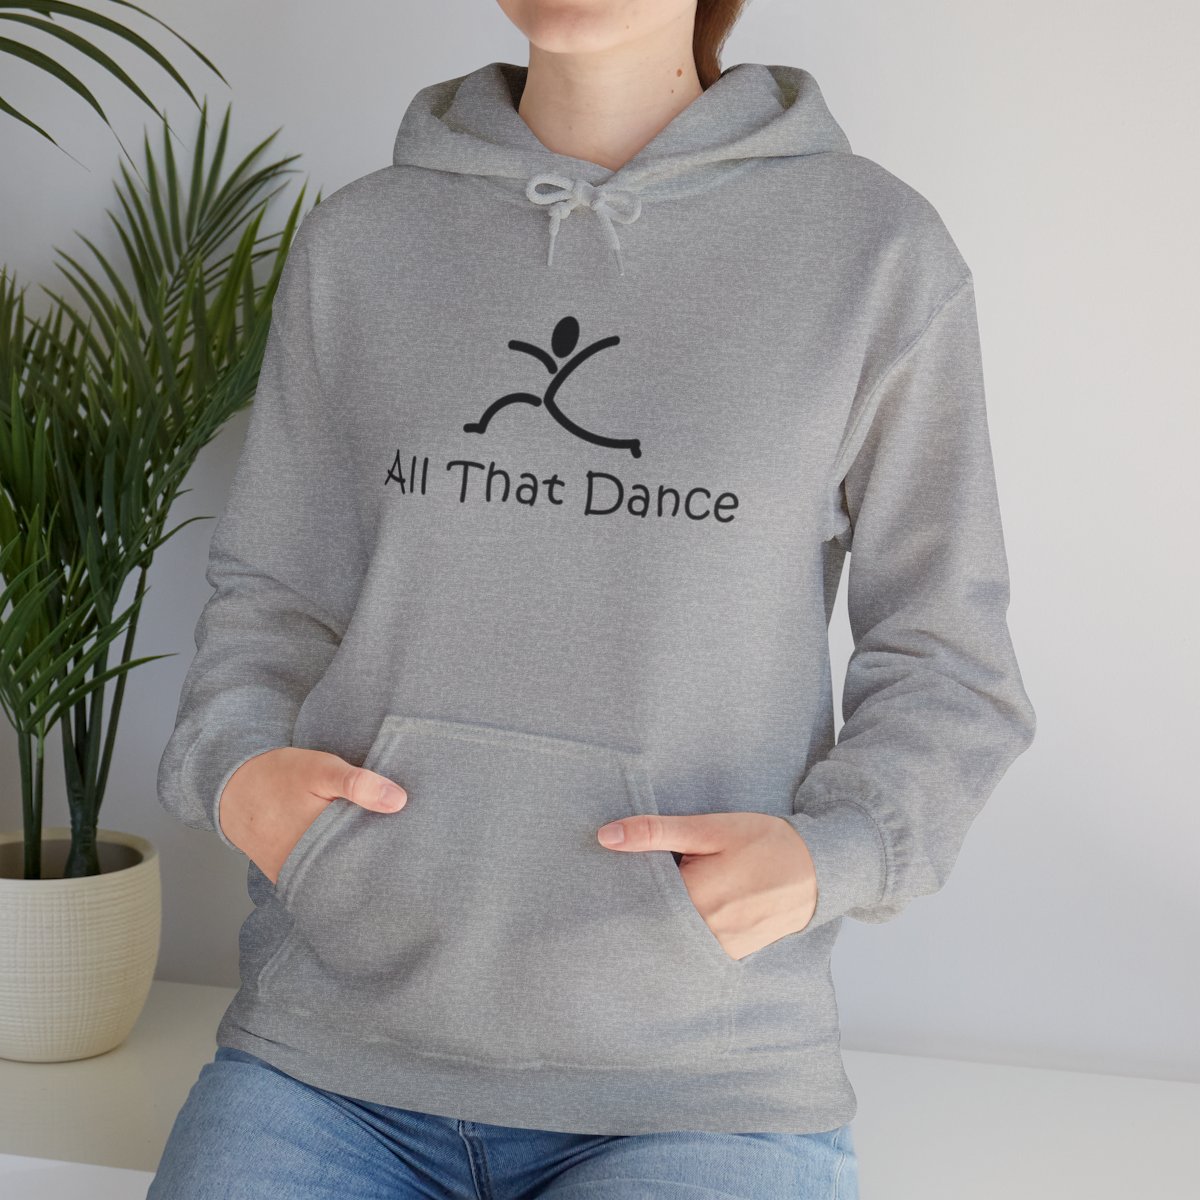 ADULT SIZES - All That Dance Hoodies product main image